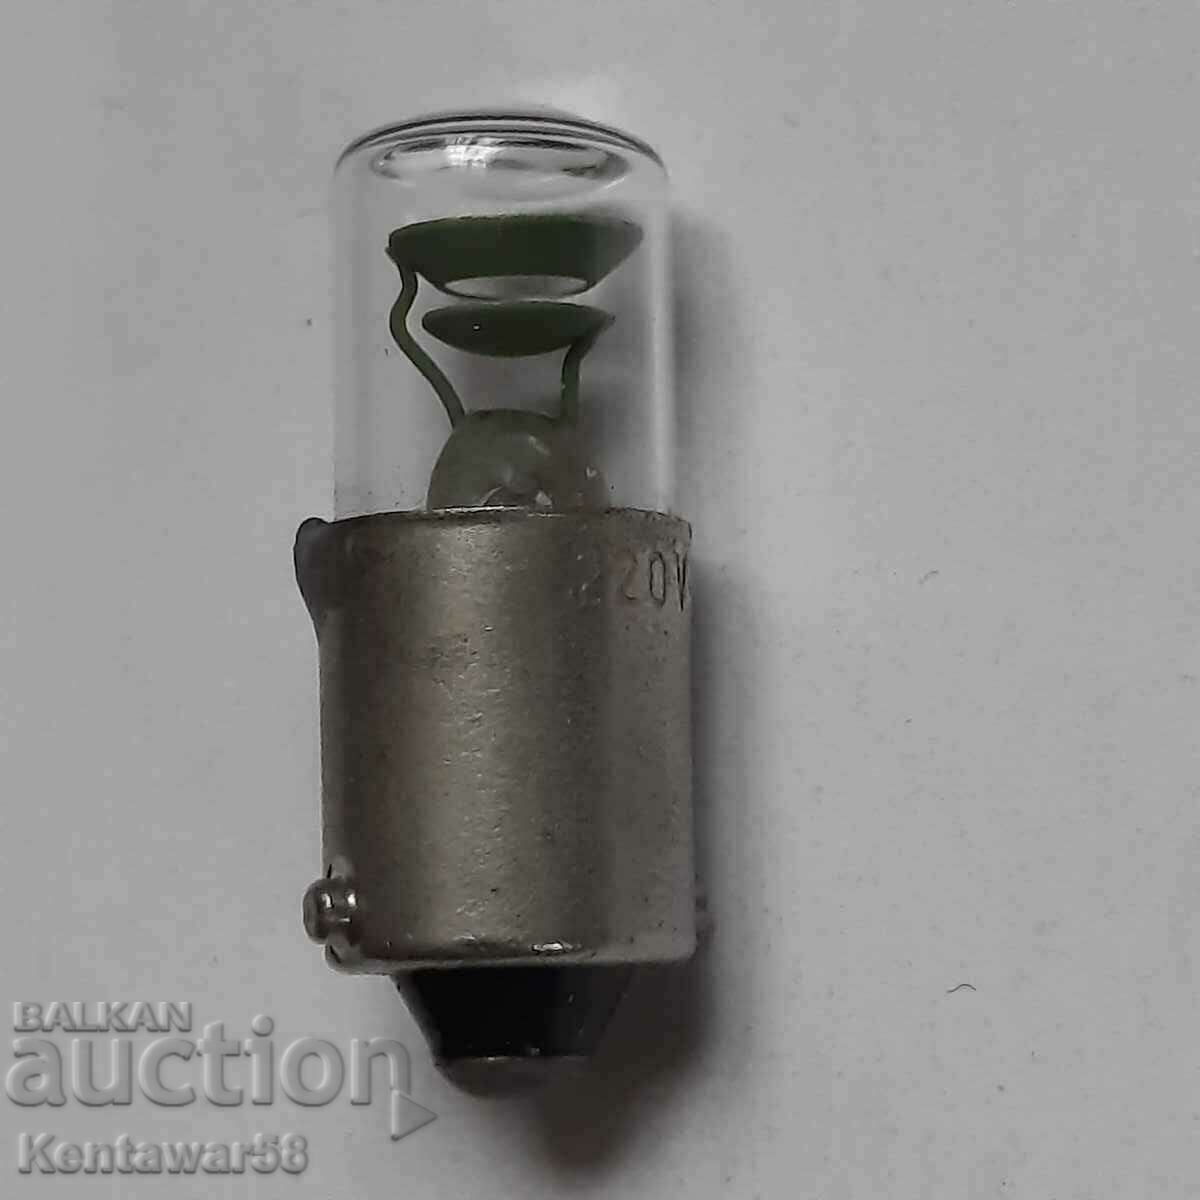 Glow lamp 220V - set with base and resistor.